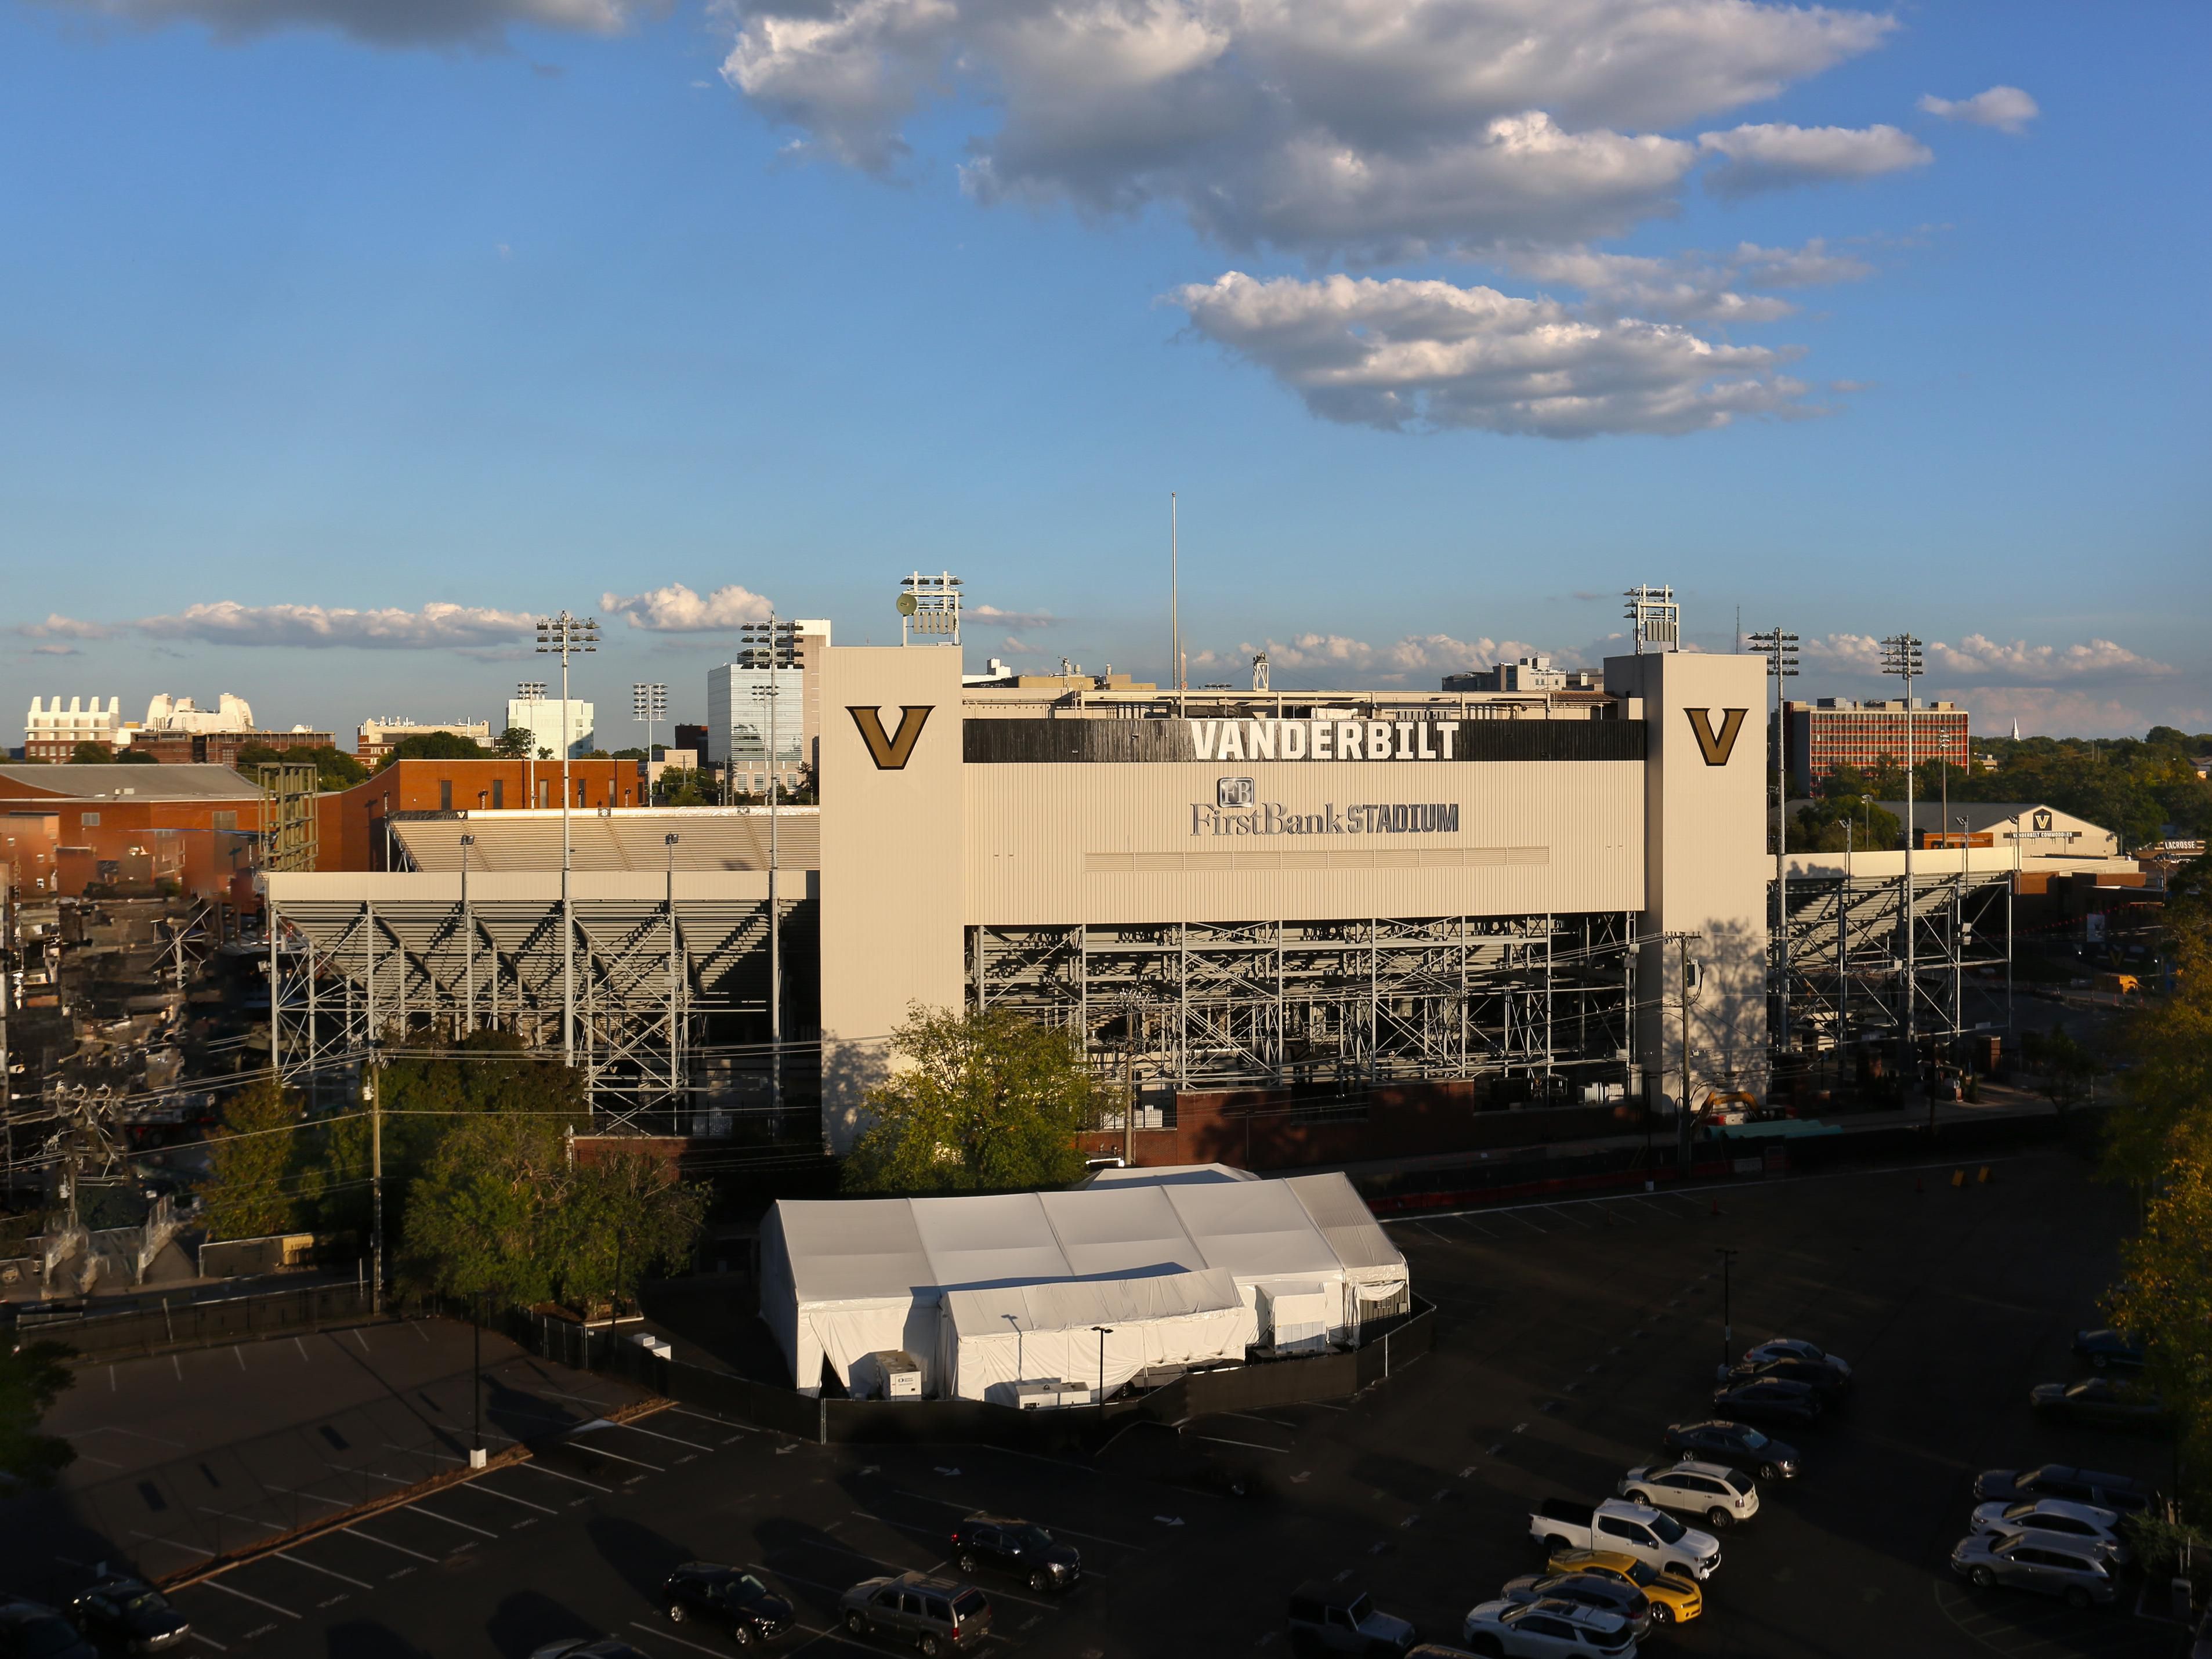 Hotel is ideally situated for a visit to Vanderbilt University, sitting directly across the parking lot from Vanderbilt Stadium.